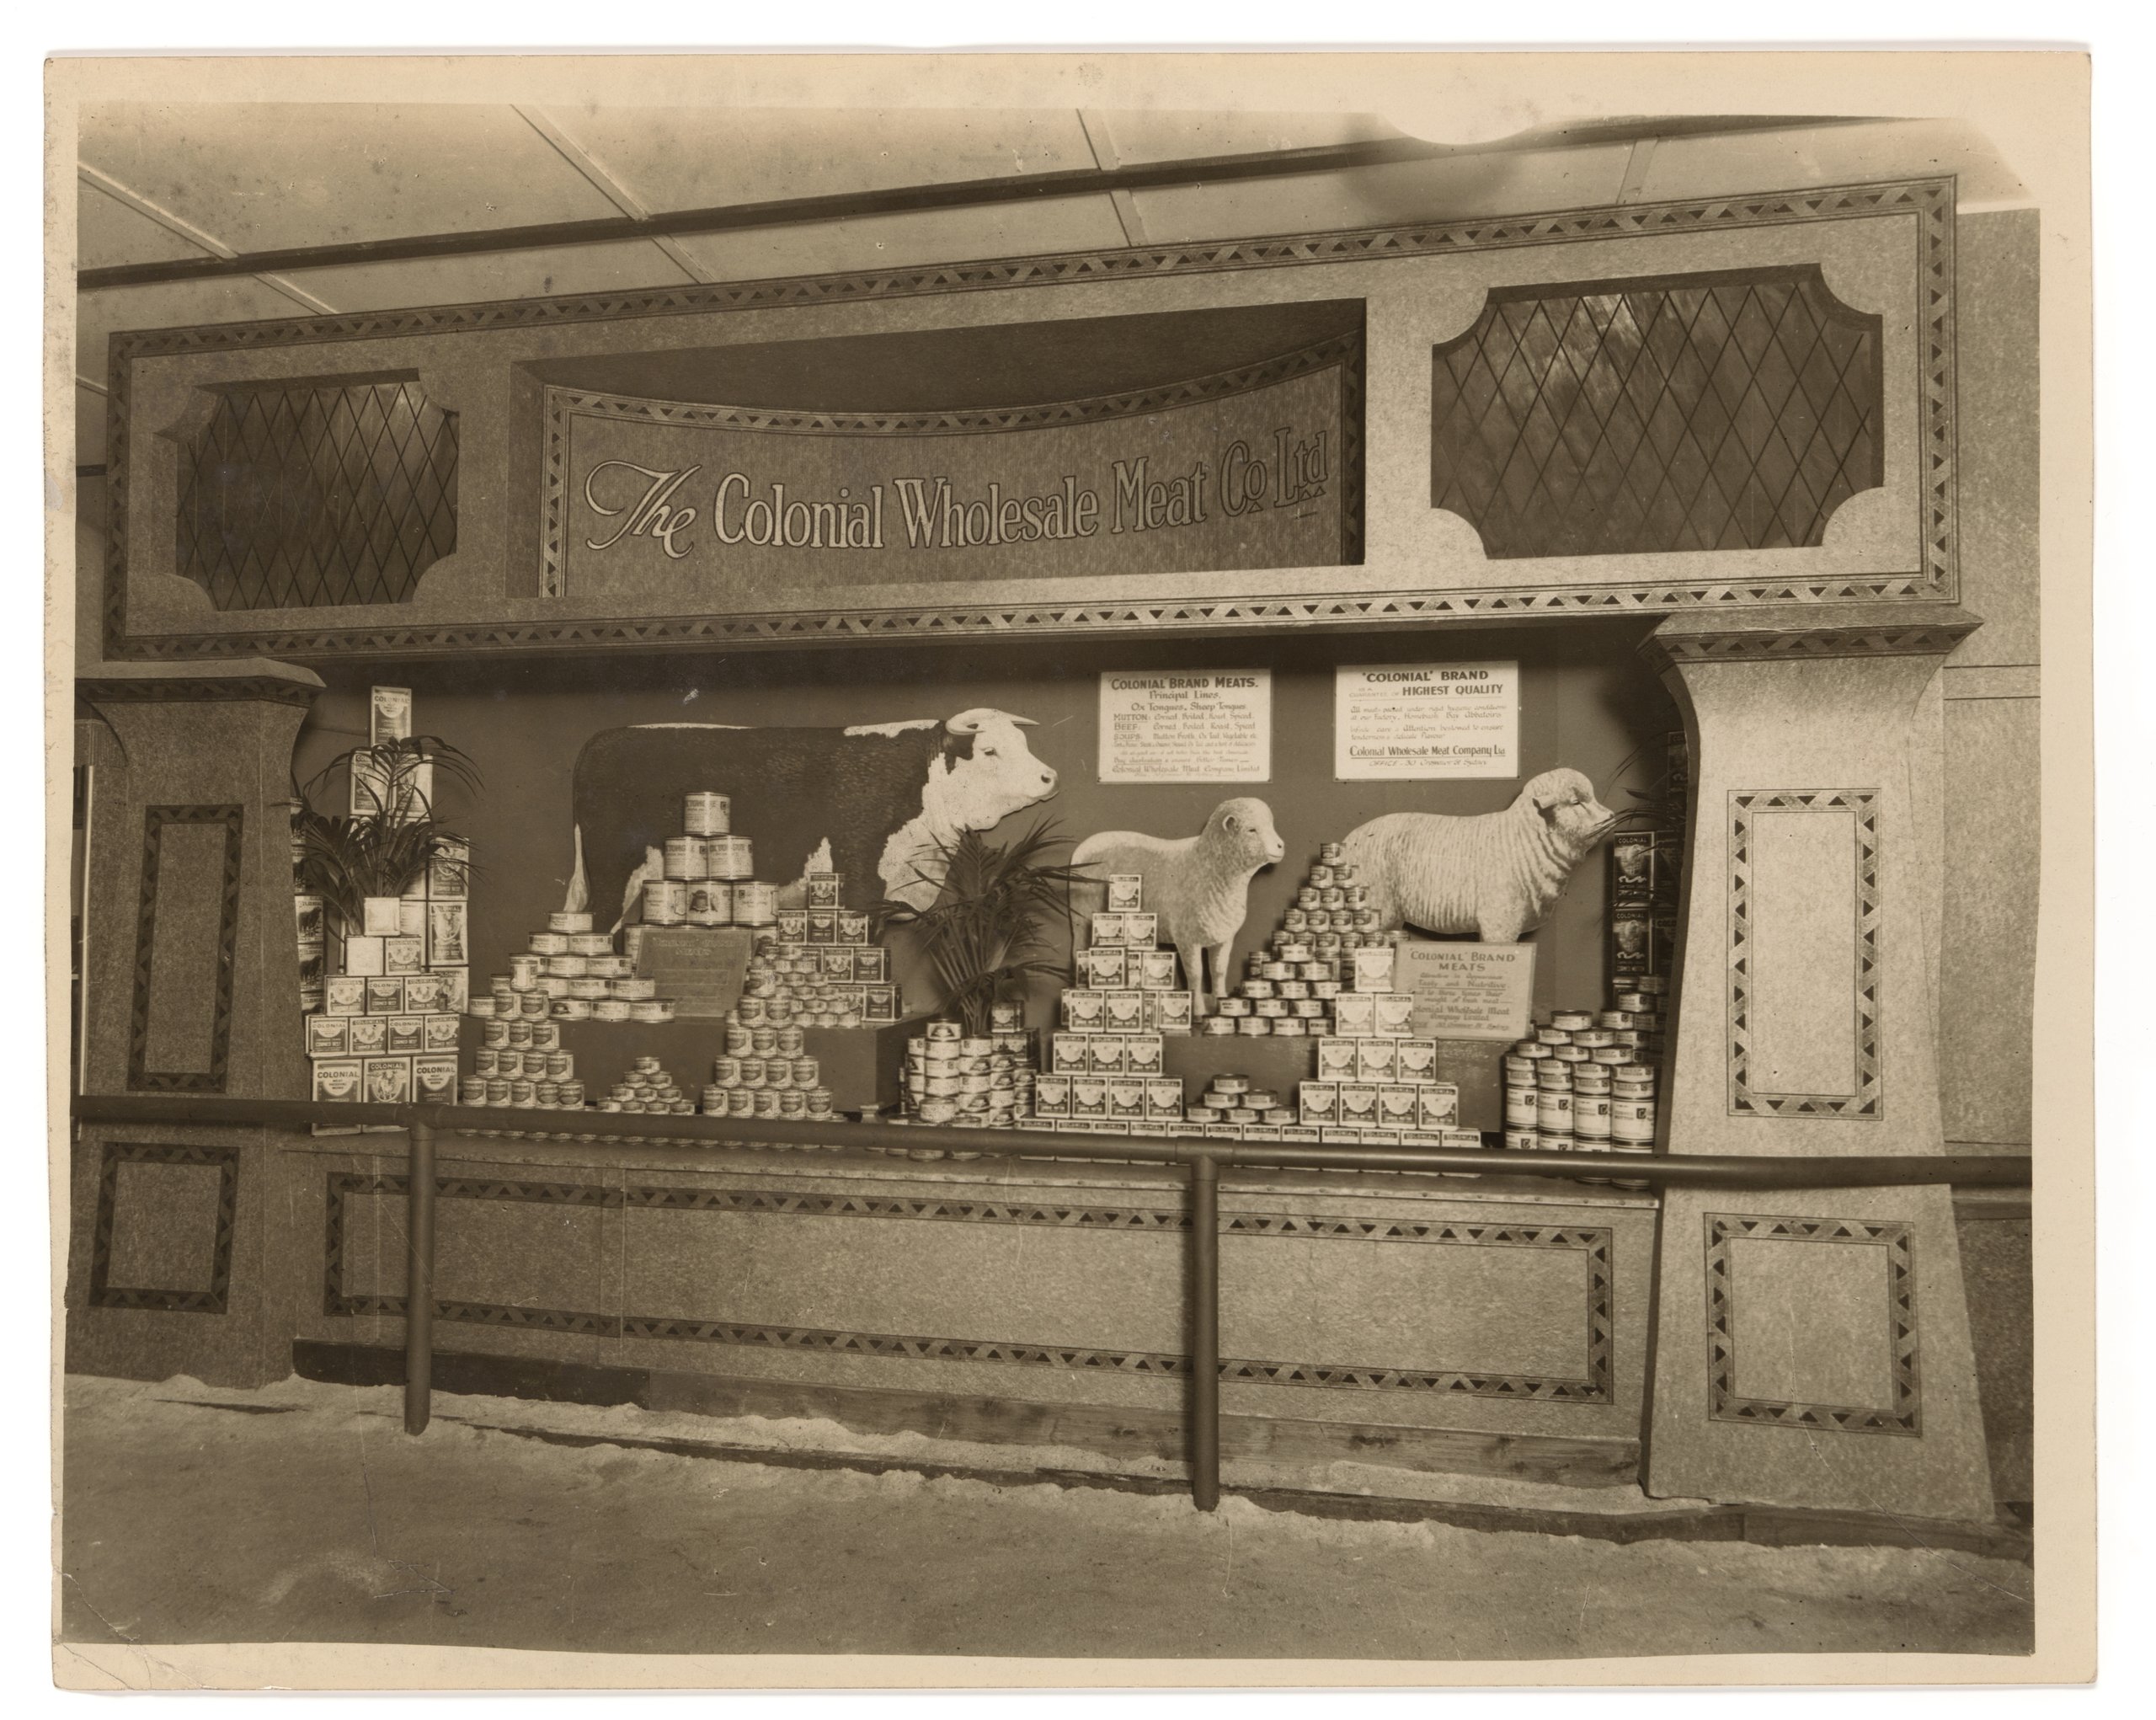 Photograph of promotional exhibit for The Colonial Wholesale Meat Co Ltd at Sydney Royal Easter Show